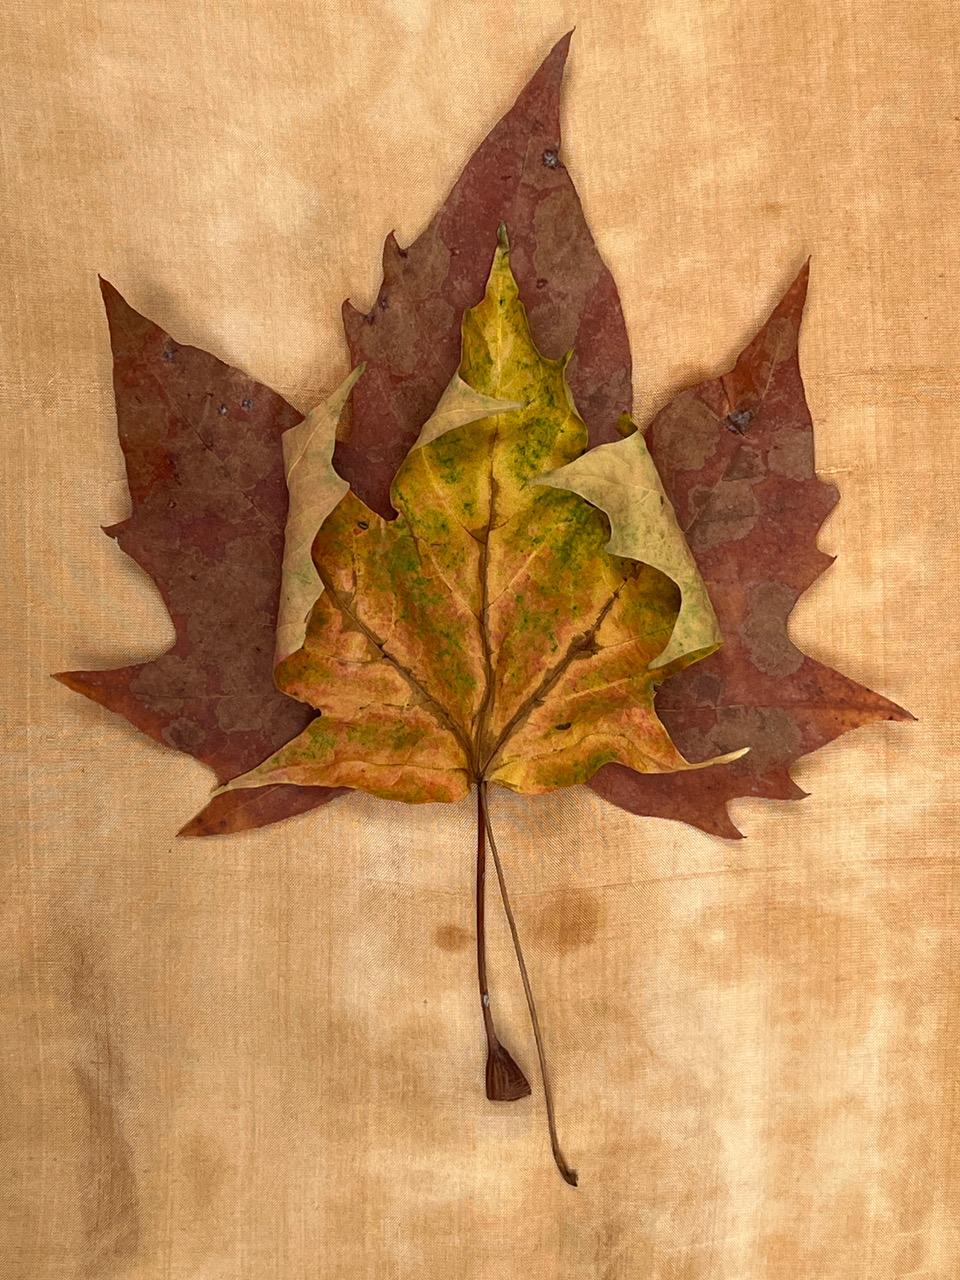 Nine Leaves: grid w/ nature still life leaf photographs in gold, red, green For Sale 6